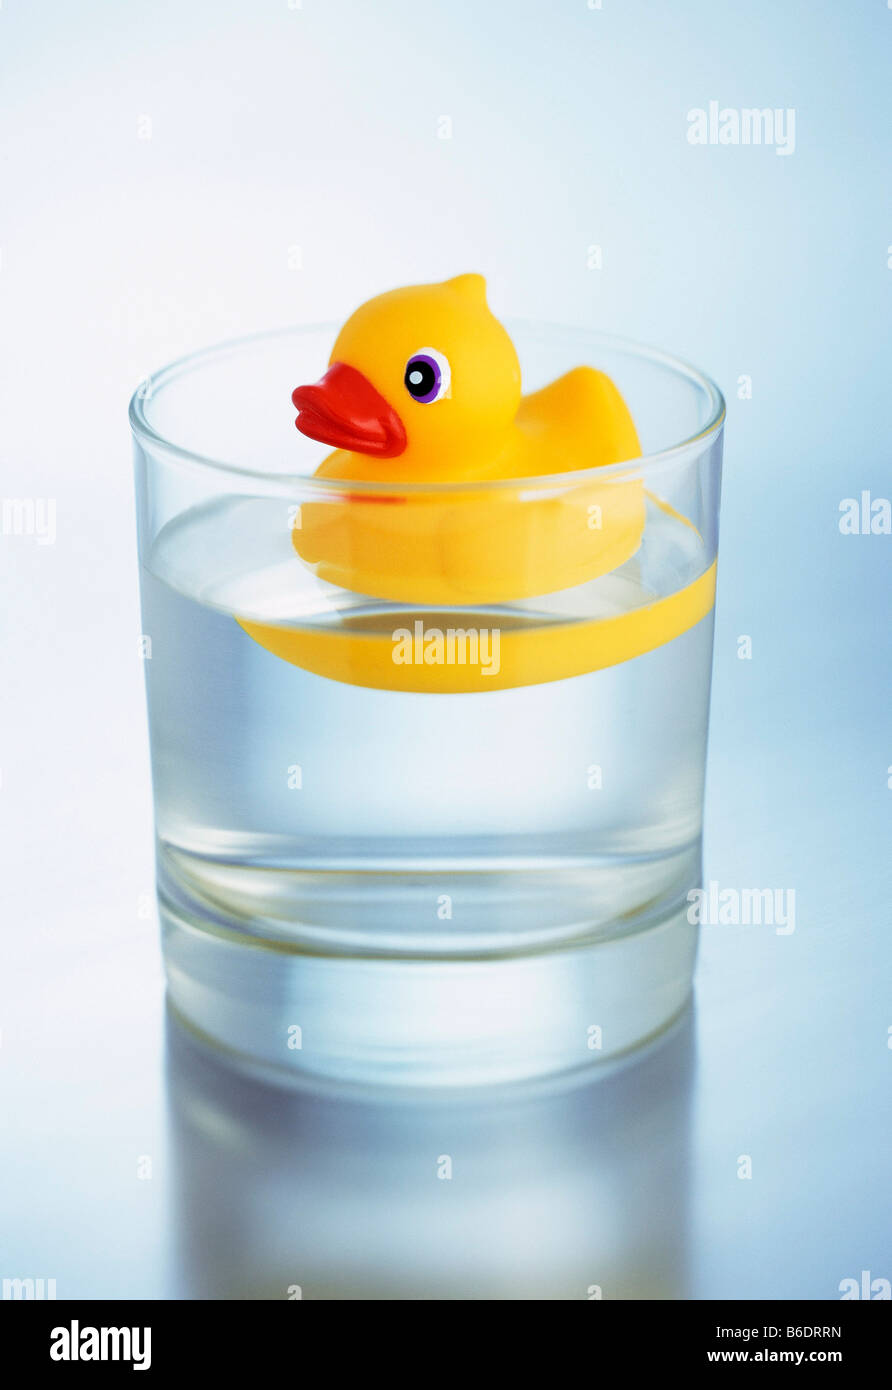 Toy duck floating on water inside a glass of water. Stock Photo